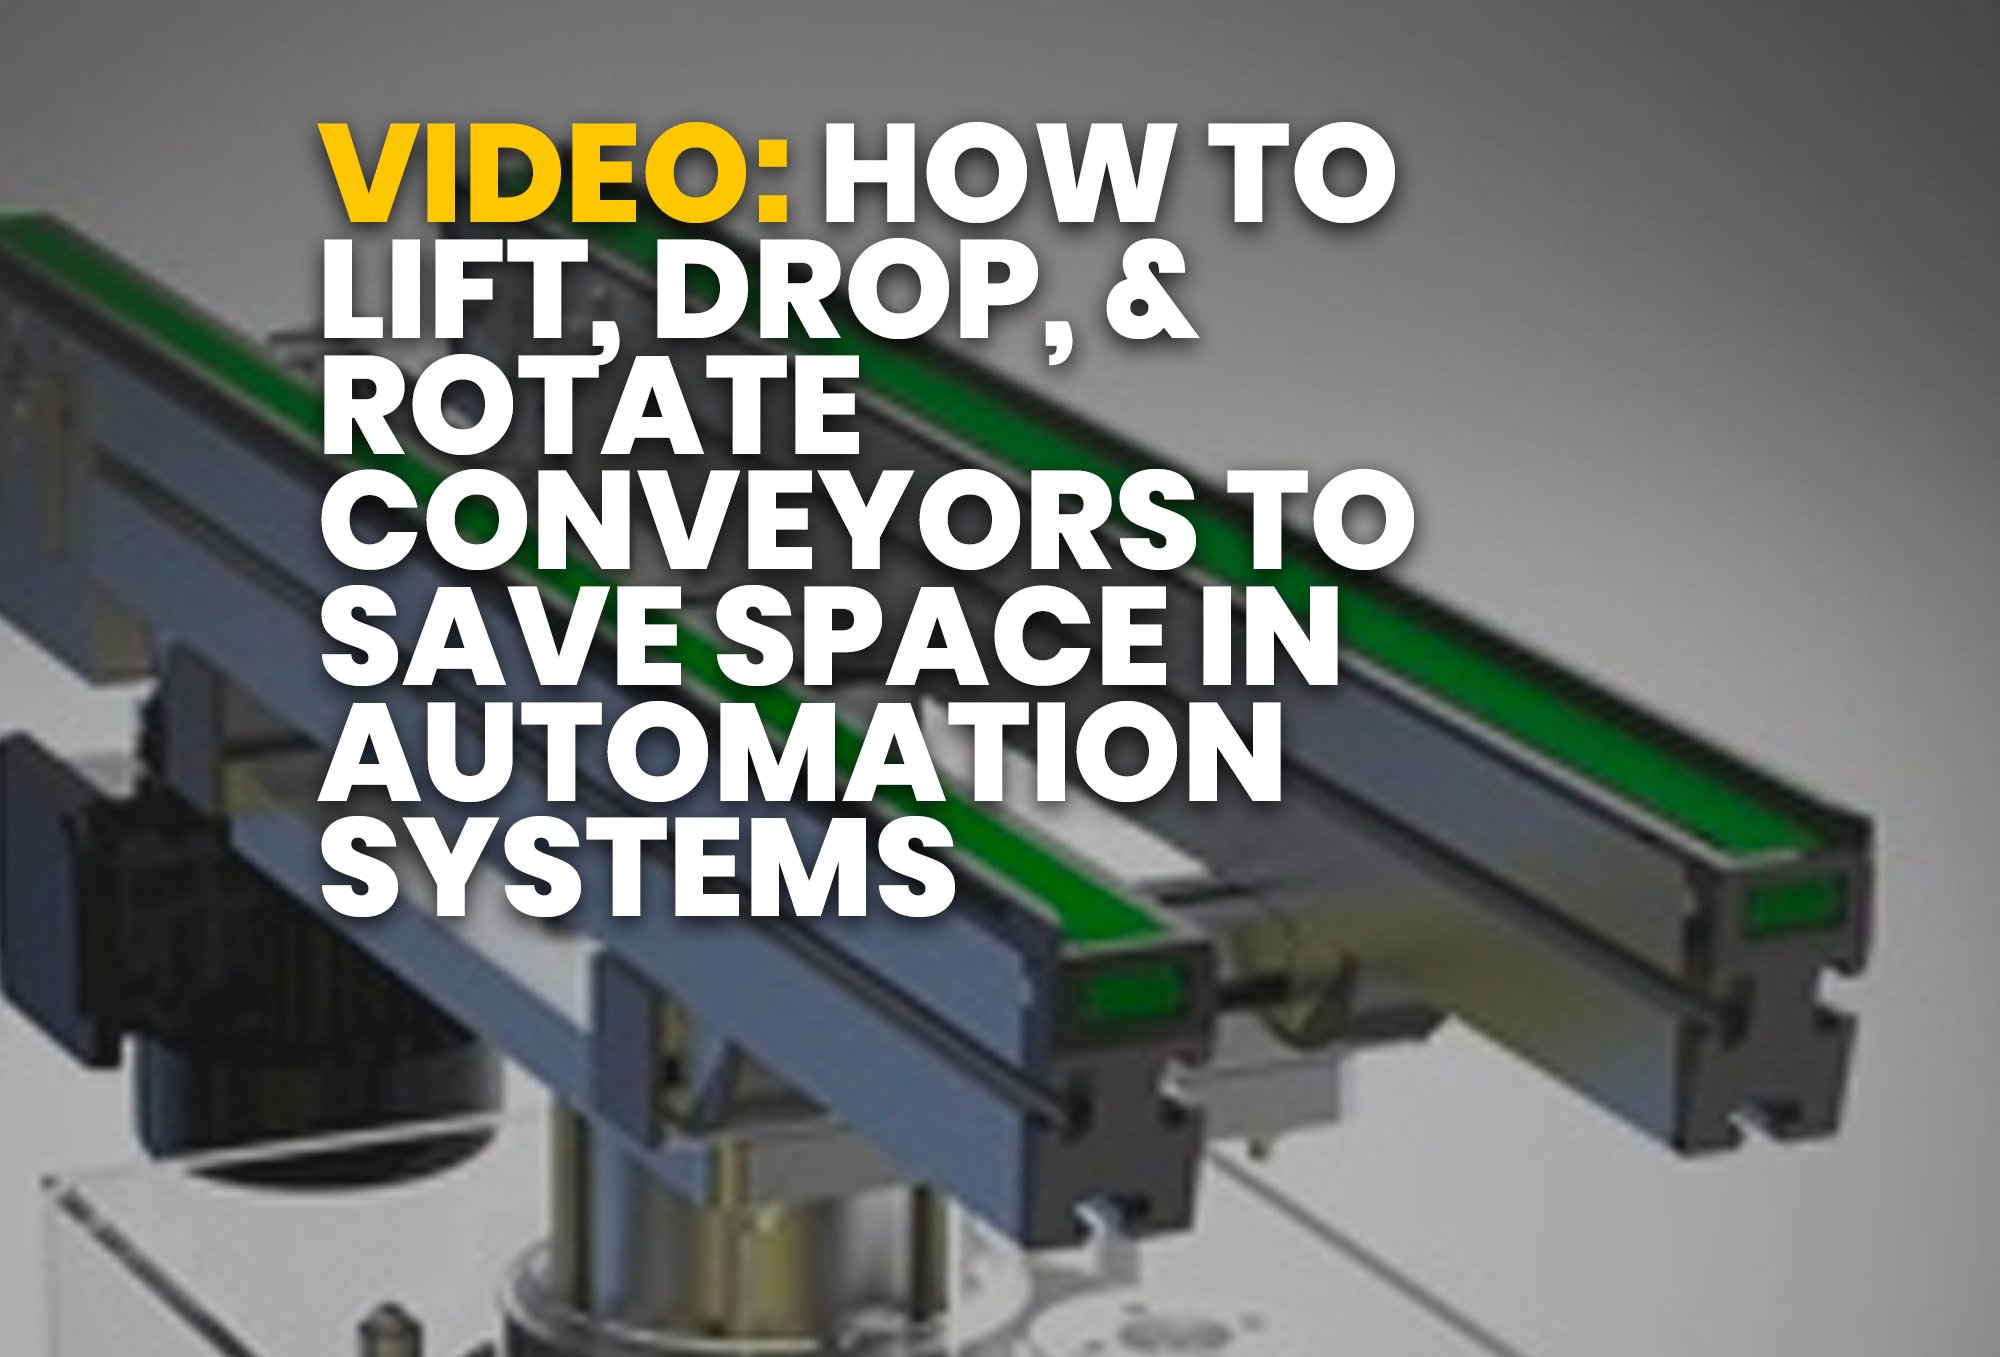 How to Lift, Drop, & Rotate Conveyors to Save Space in Automation Systems - resource